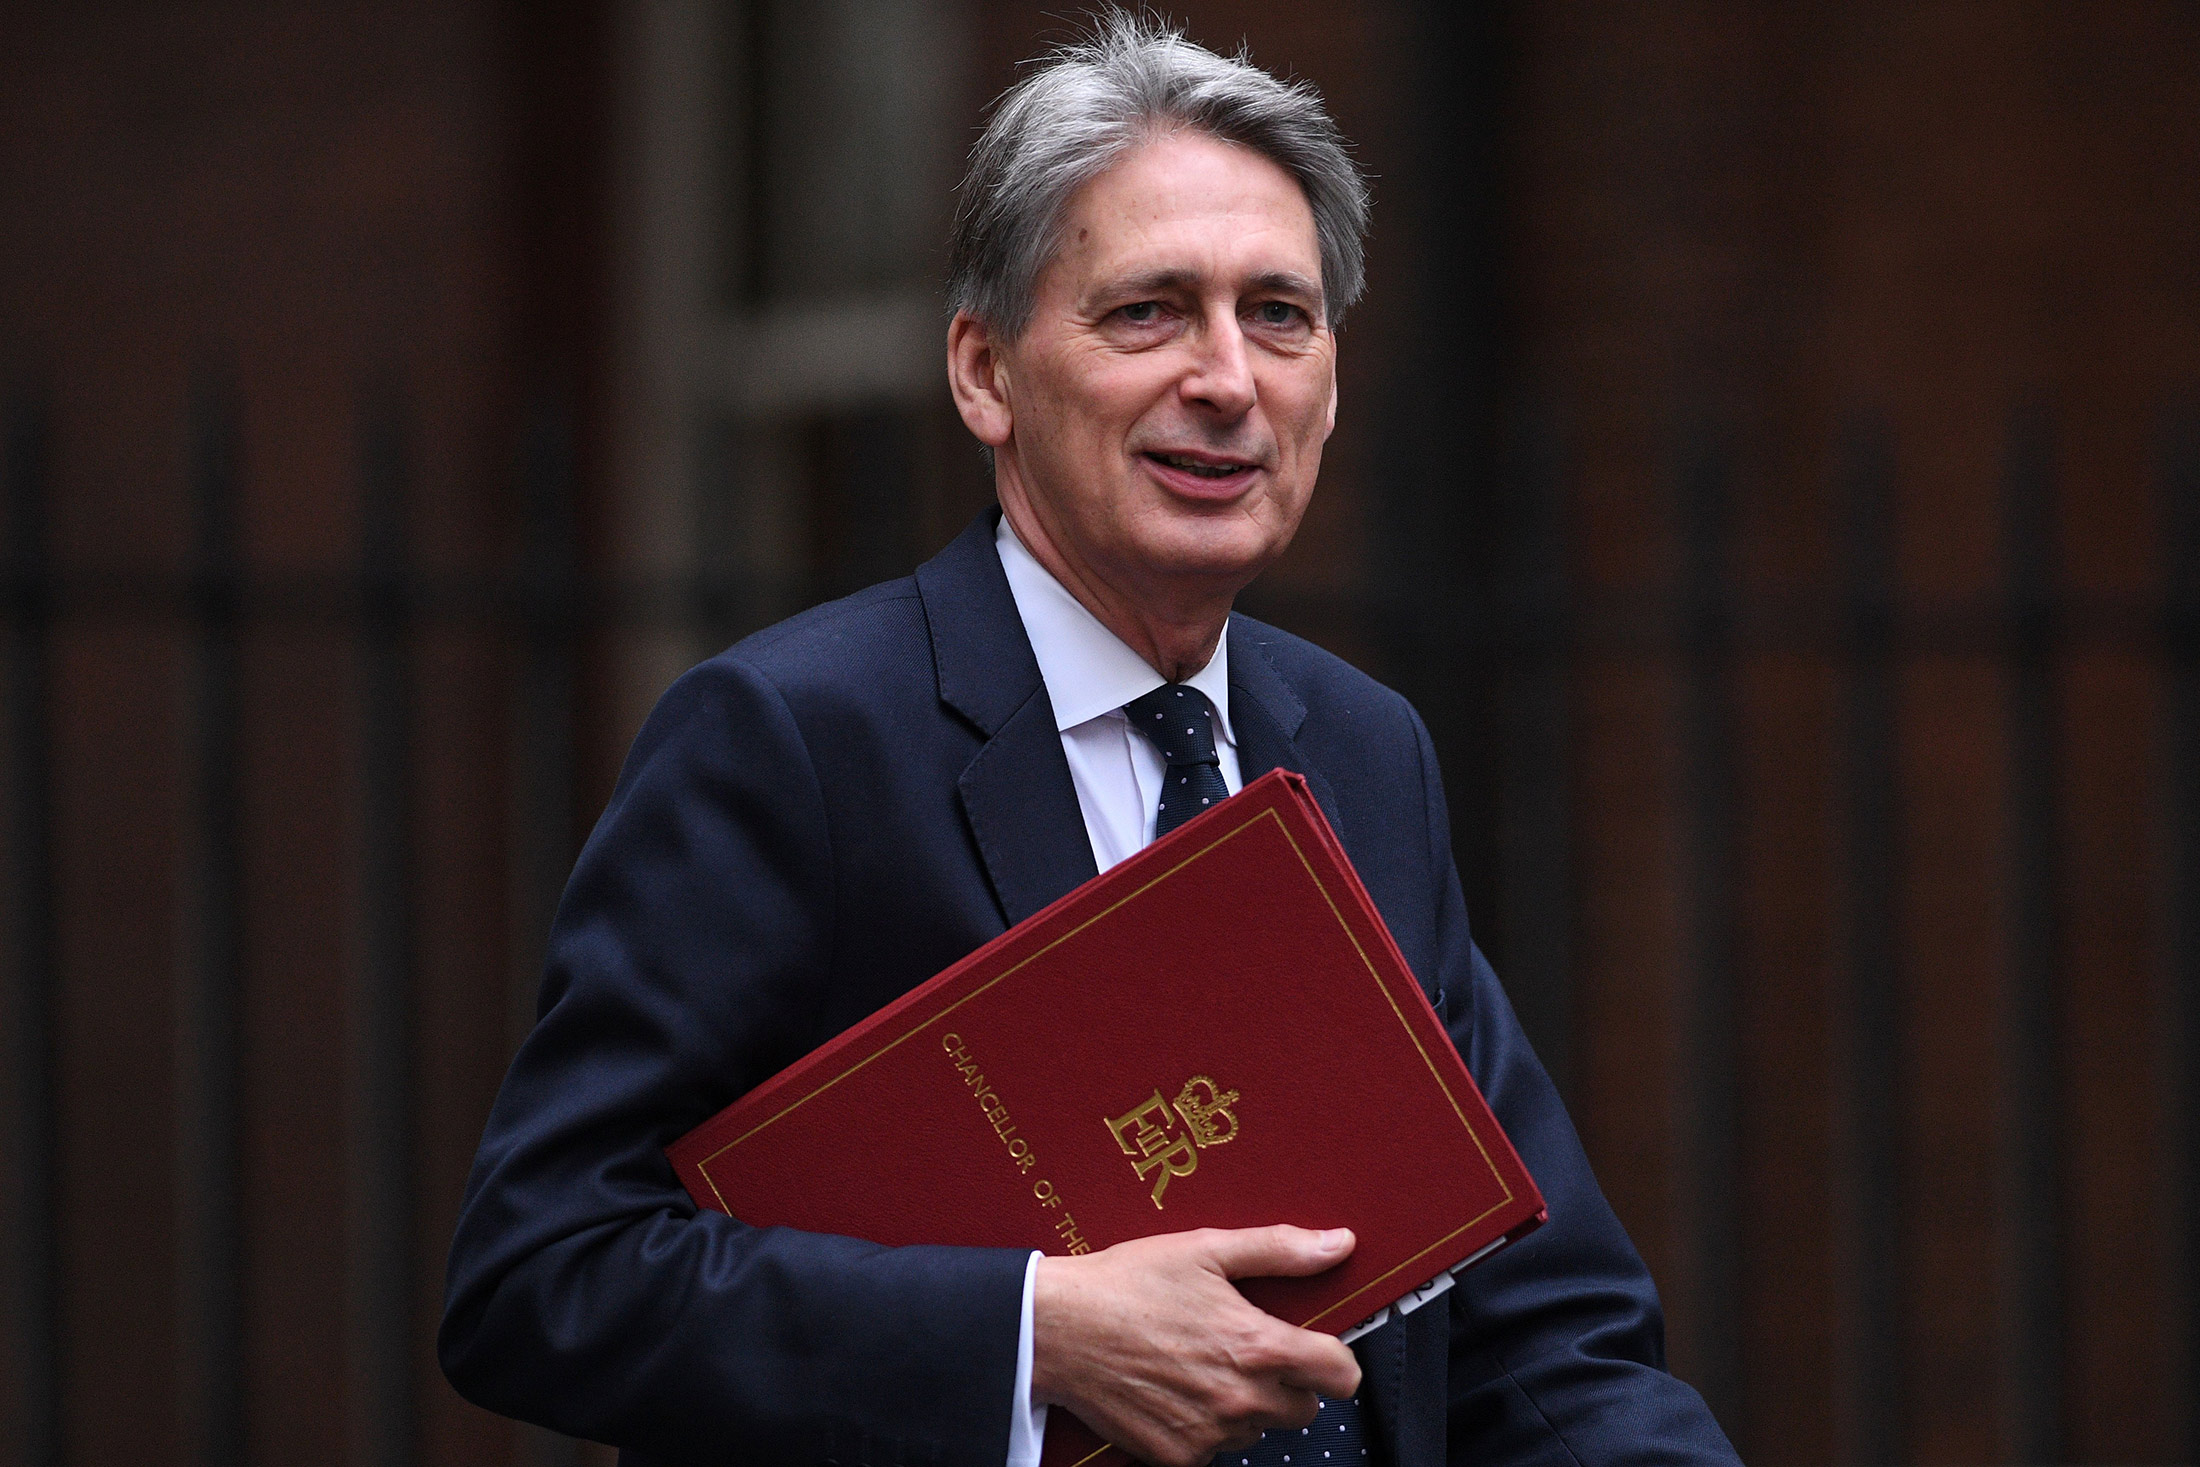 The Chancellor Philip Hammond delivered his maiden autumn statement against a backdrop of weaker growth prospects and a large deficit